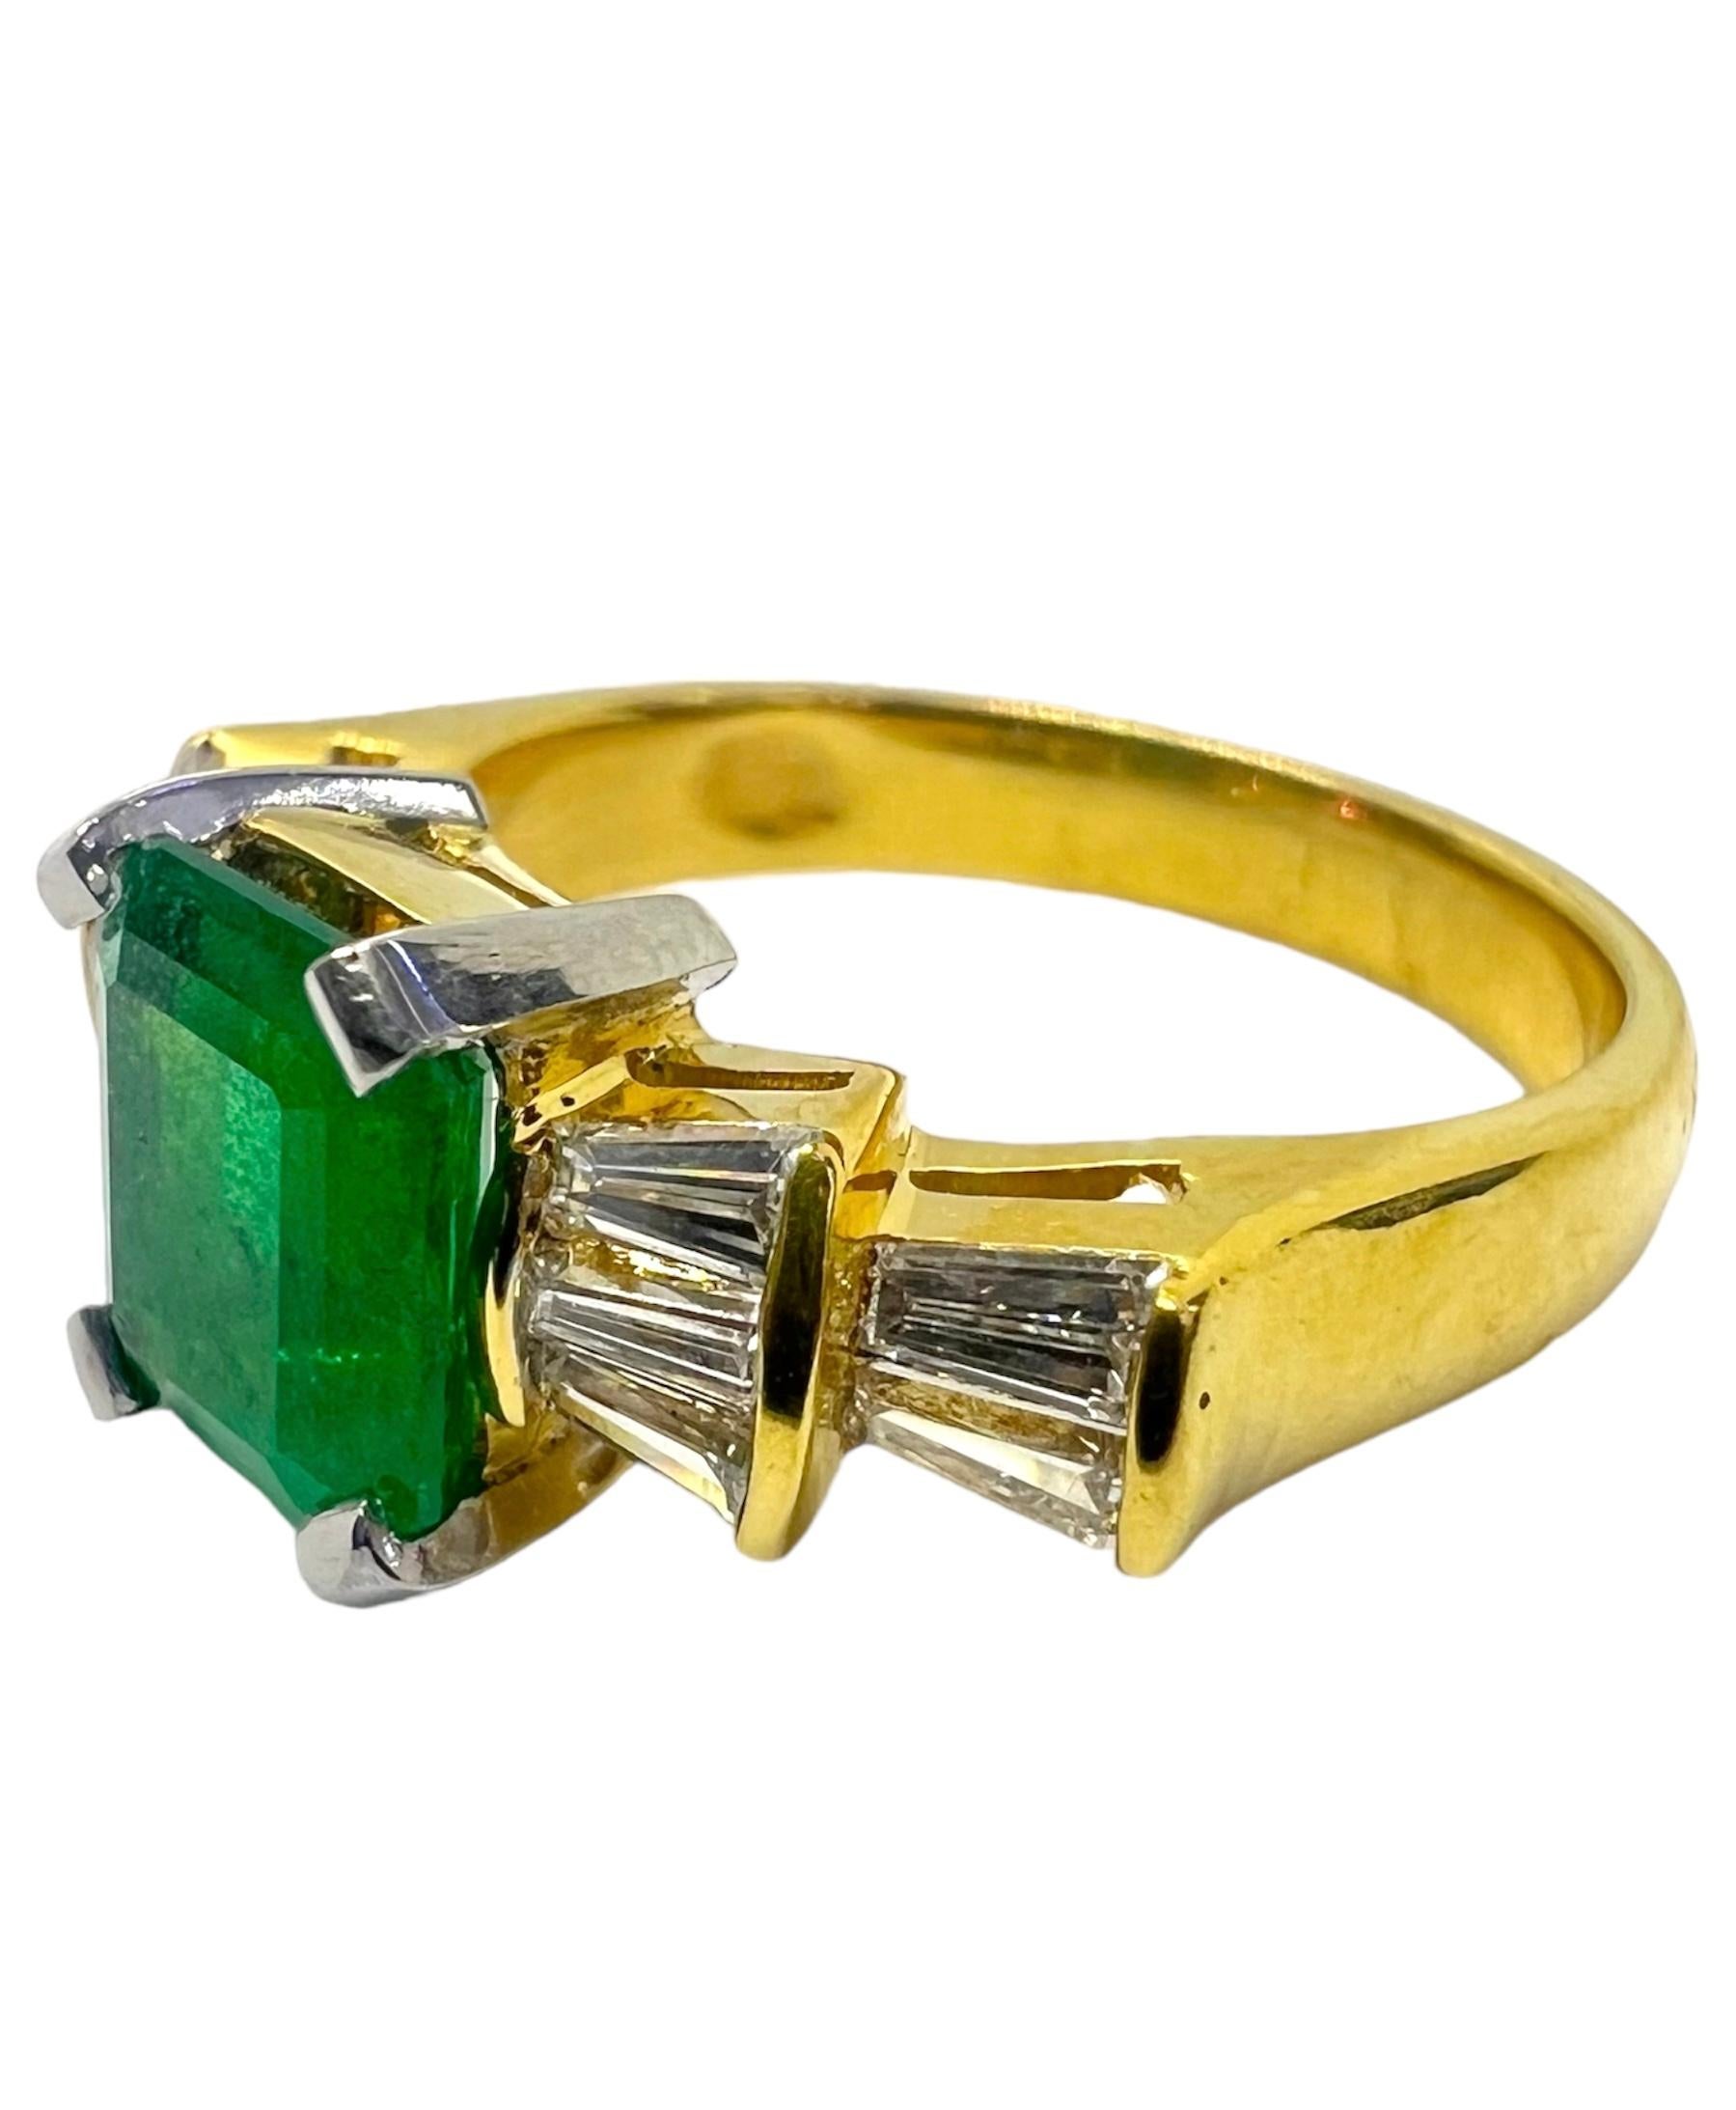 18K yellow gold ring with emerald center stone accentuated with diamonds.

Sophia D by Joseph Dardashti LTD has been known worldwide for 35 years and are inspired by classic Art Deco design that merges with modern manufacturing techniques.